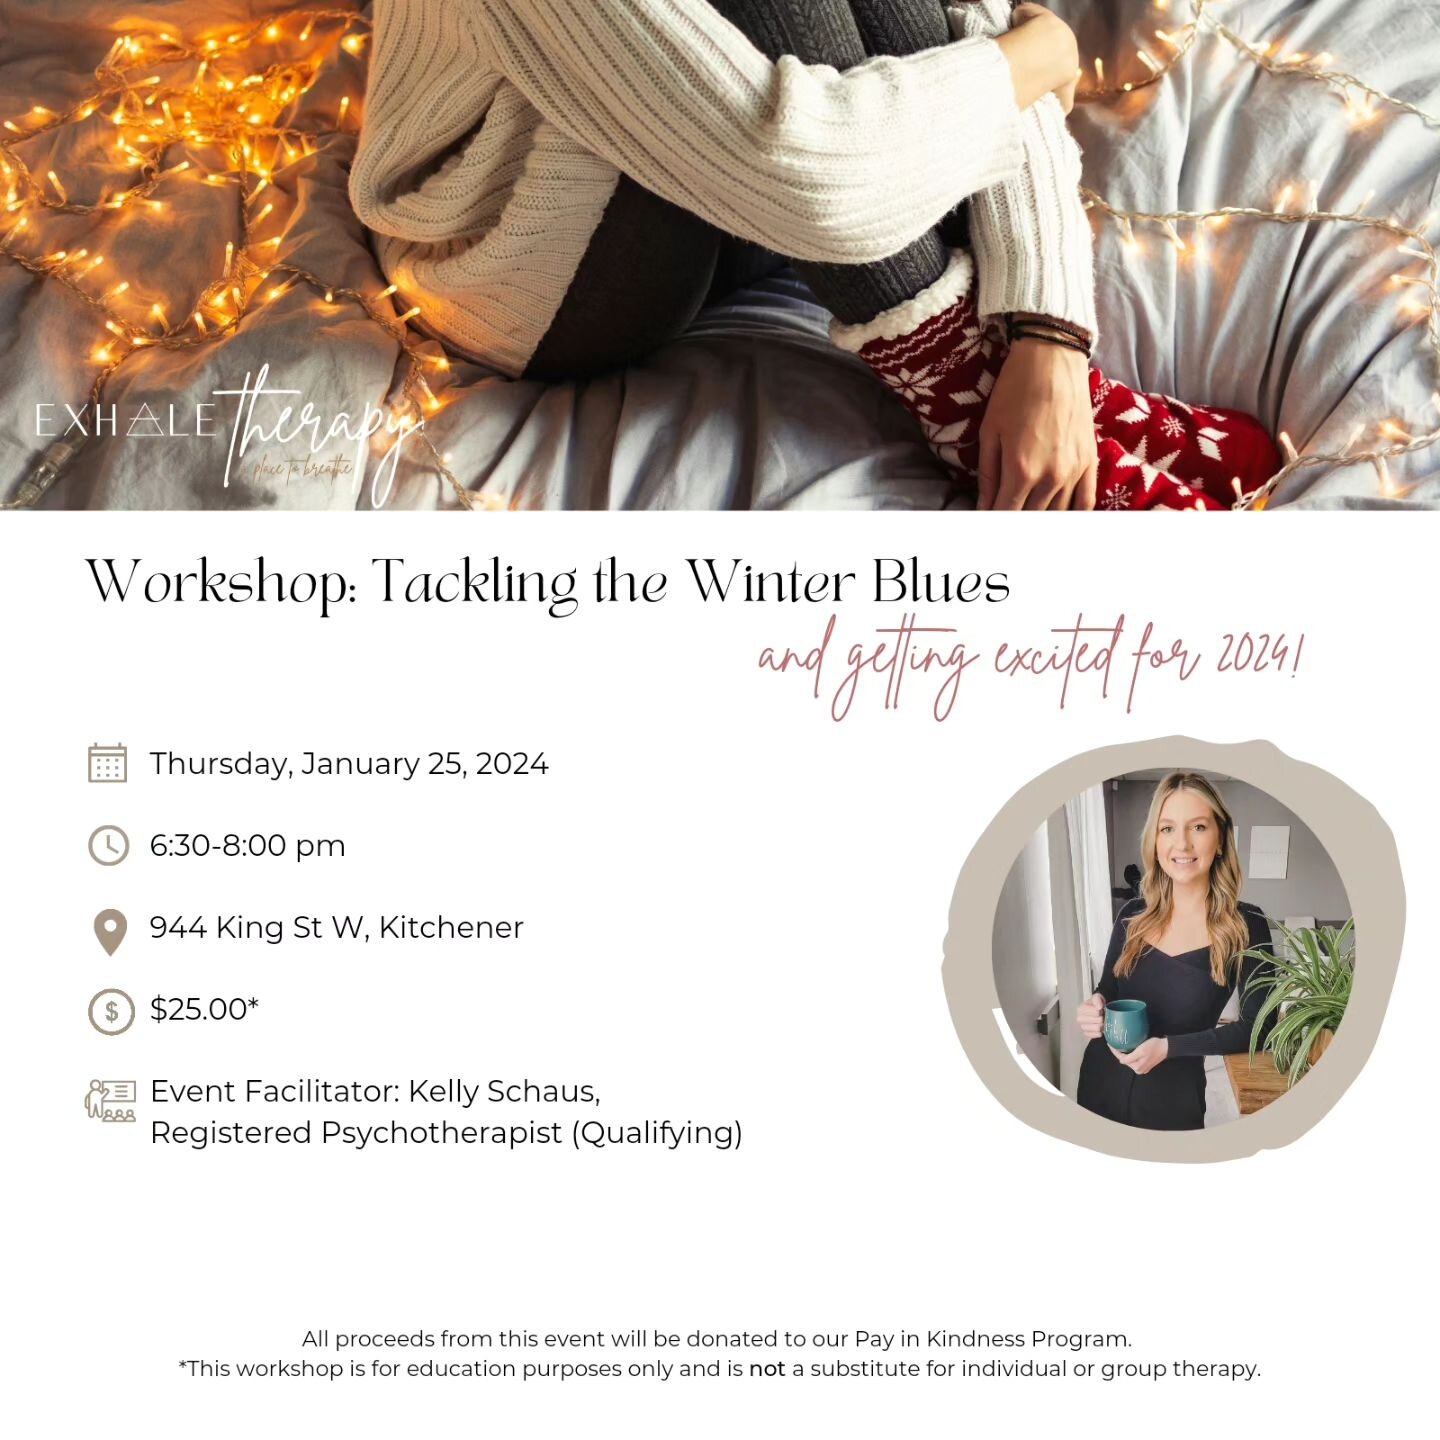 Join us for an interactive workshop that covers winter wellness and getting set up for 2024!
.
Hosted by Kelly Schaus, Registered Psychotherapist (Qualifying), this workshop offers practical strategies to navigate the winter blues. 
.
From coping wit